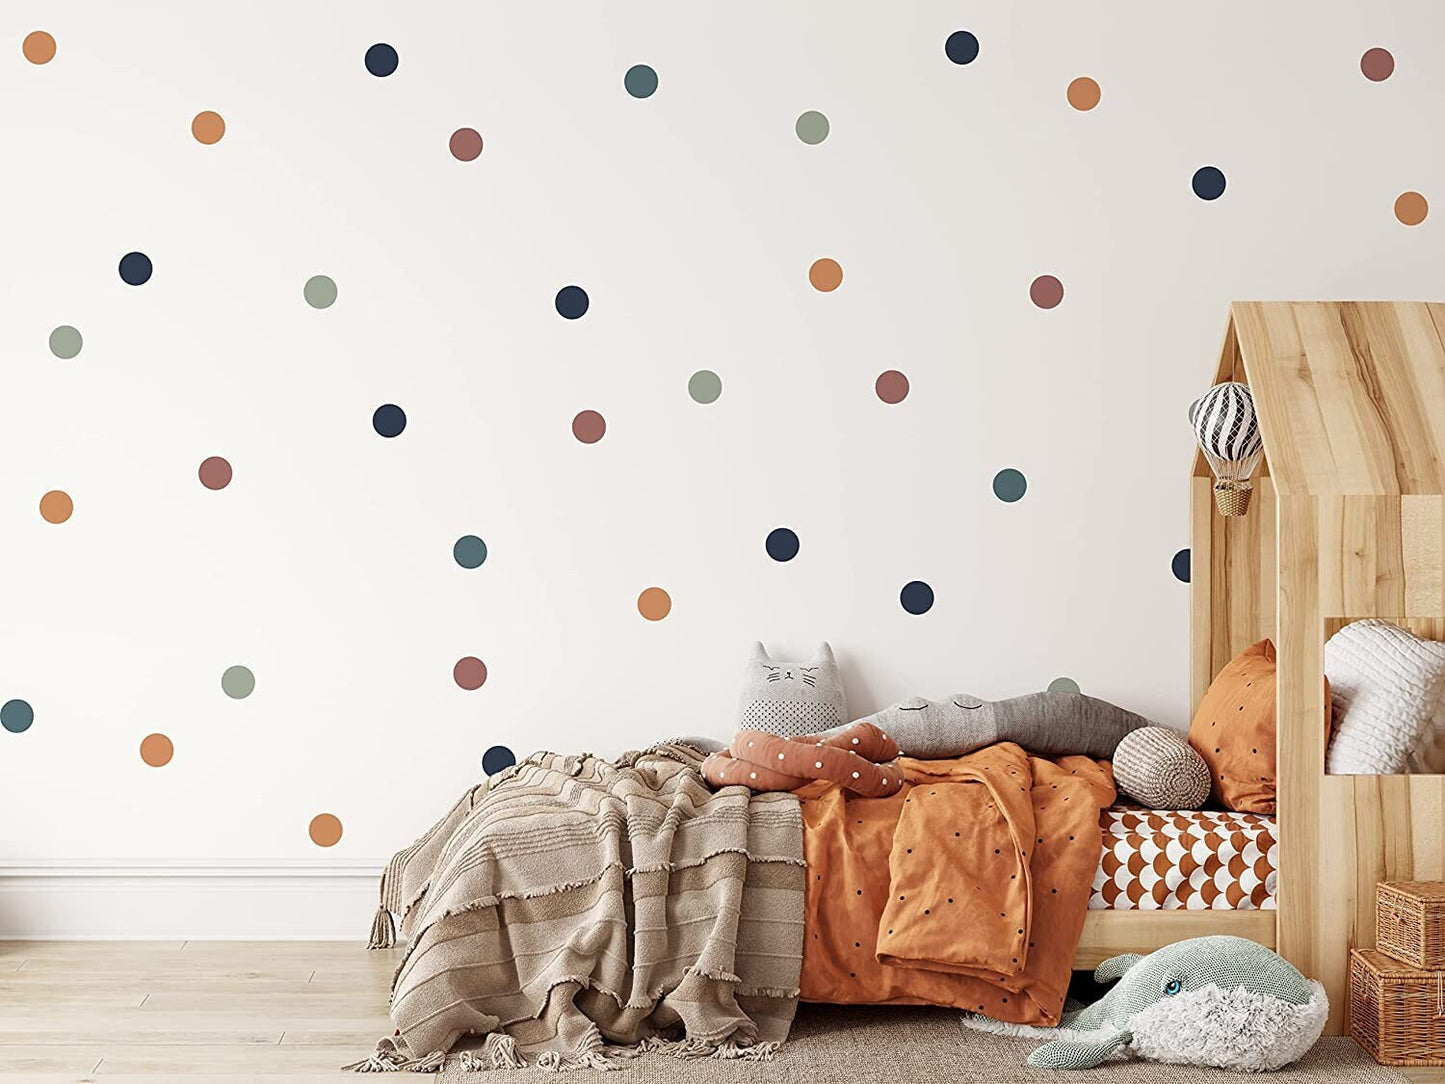 Round Circle Boho Polka Dot Wall Stickers | Boho Chic Wall Decals Decor Removable Spots For Nursery Kids Playroom